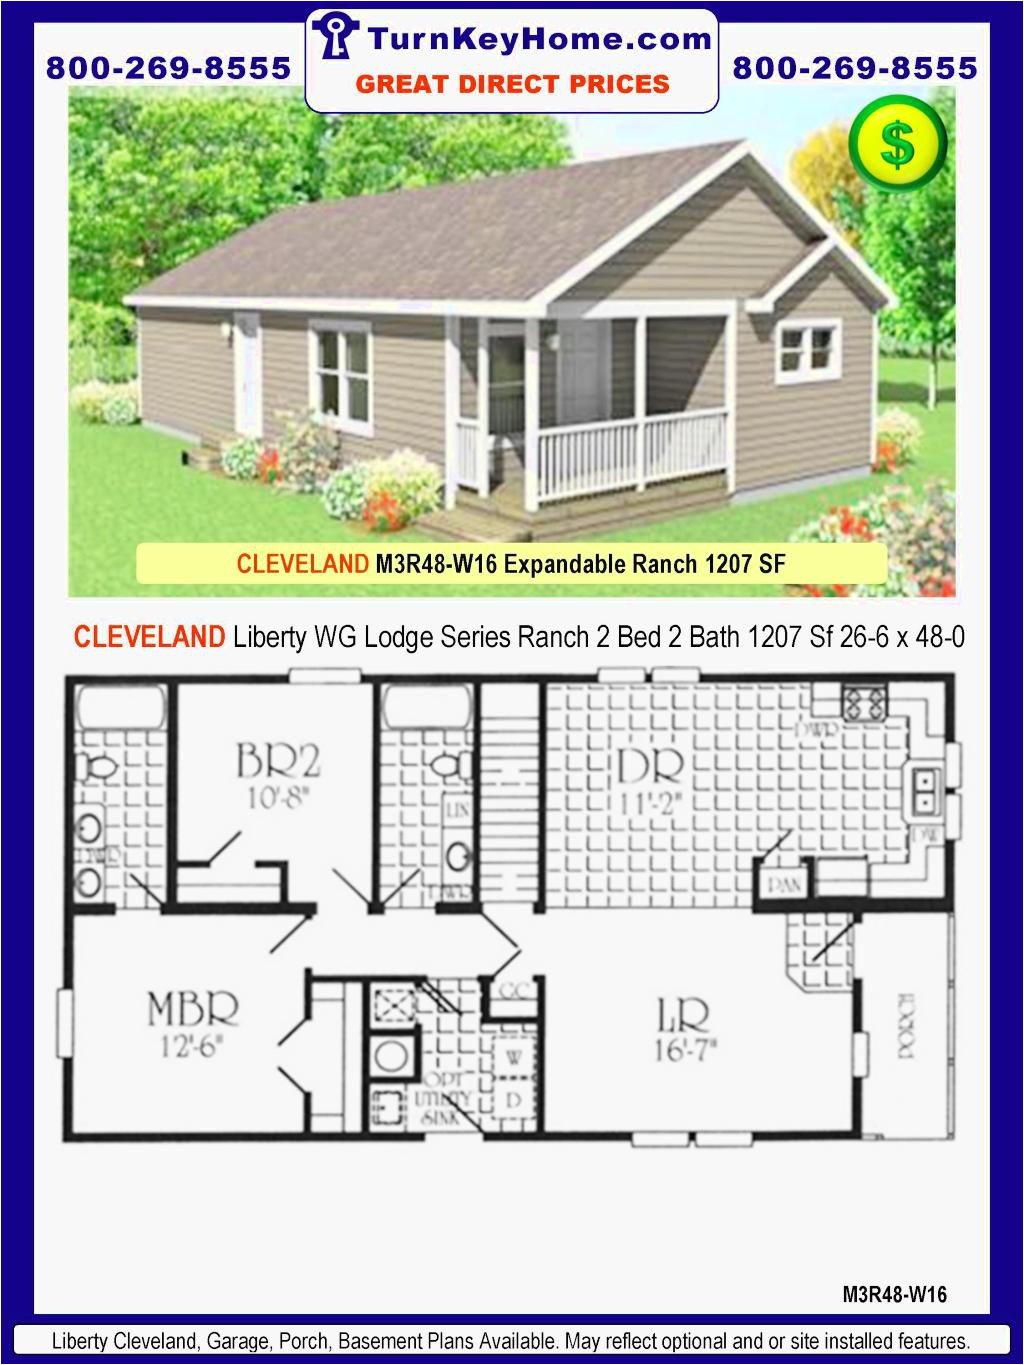 2500 Sq Ft House Plans with Wrap Around Porch